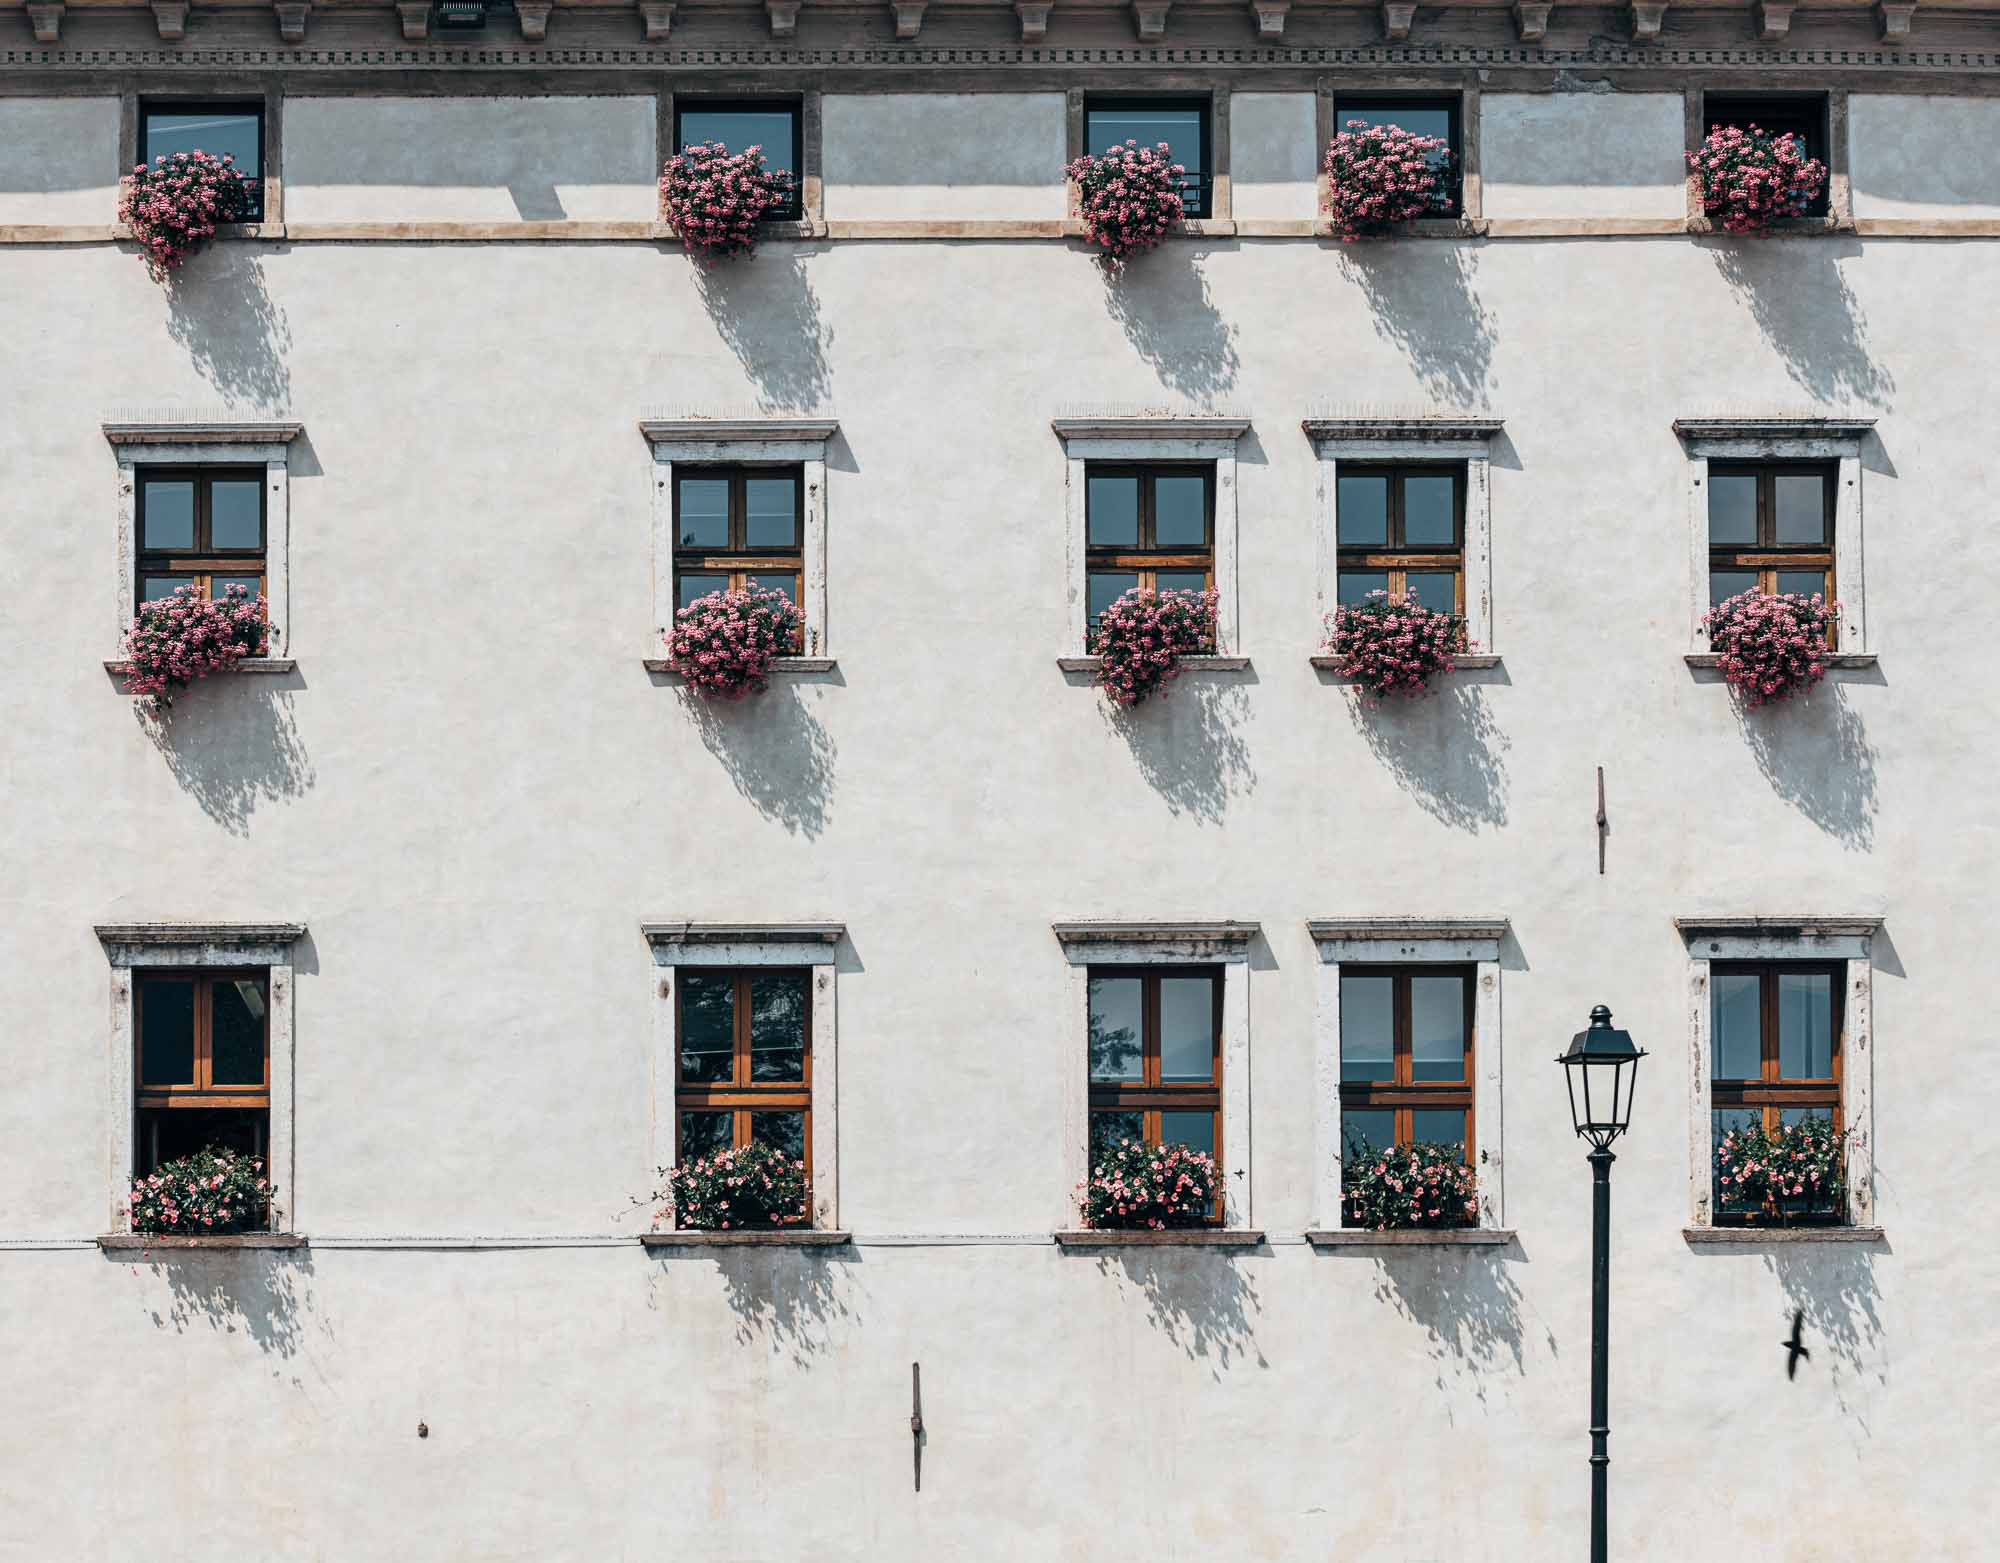 Facade of an Italian building adorned with multiple windows, each accented with vibrant pink flowers in Limone, Italy.